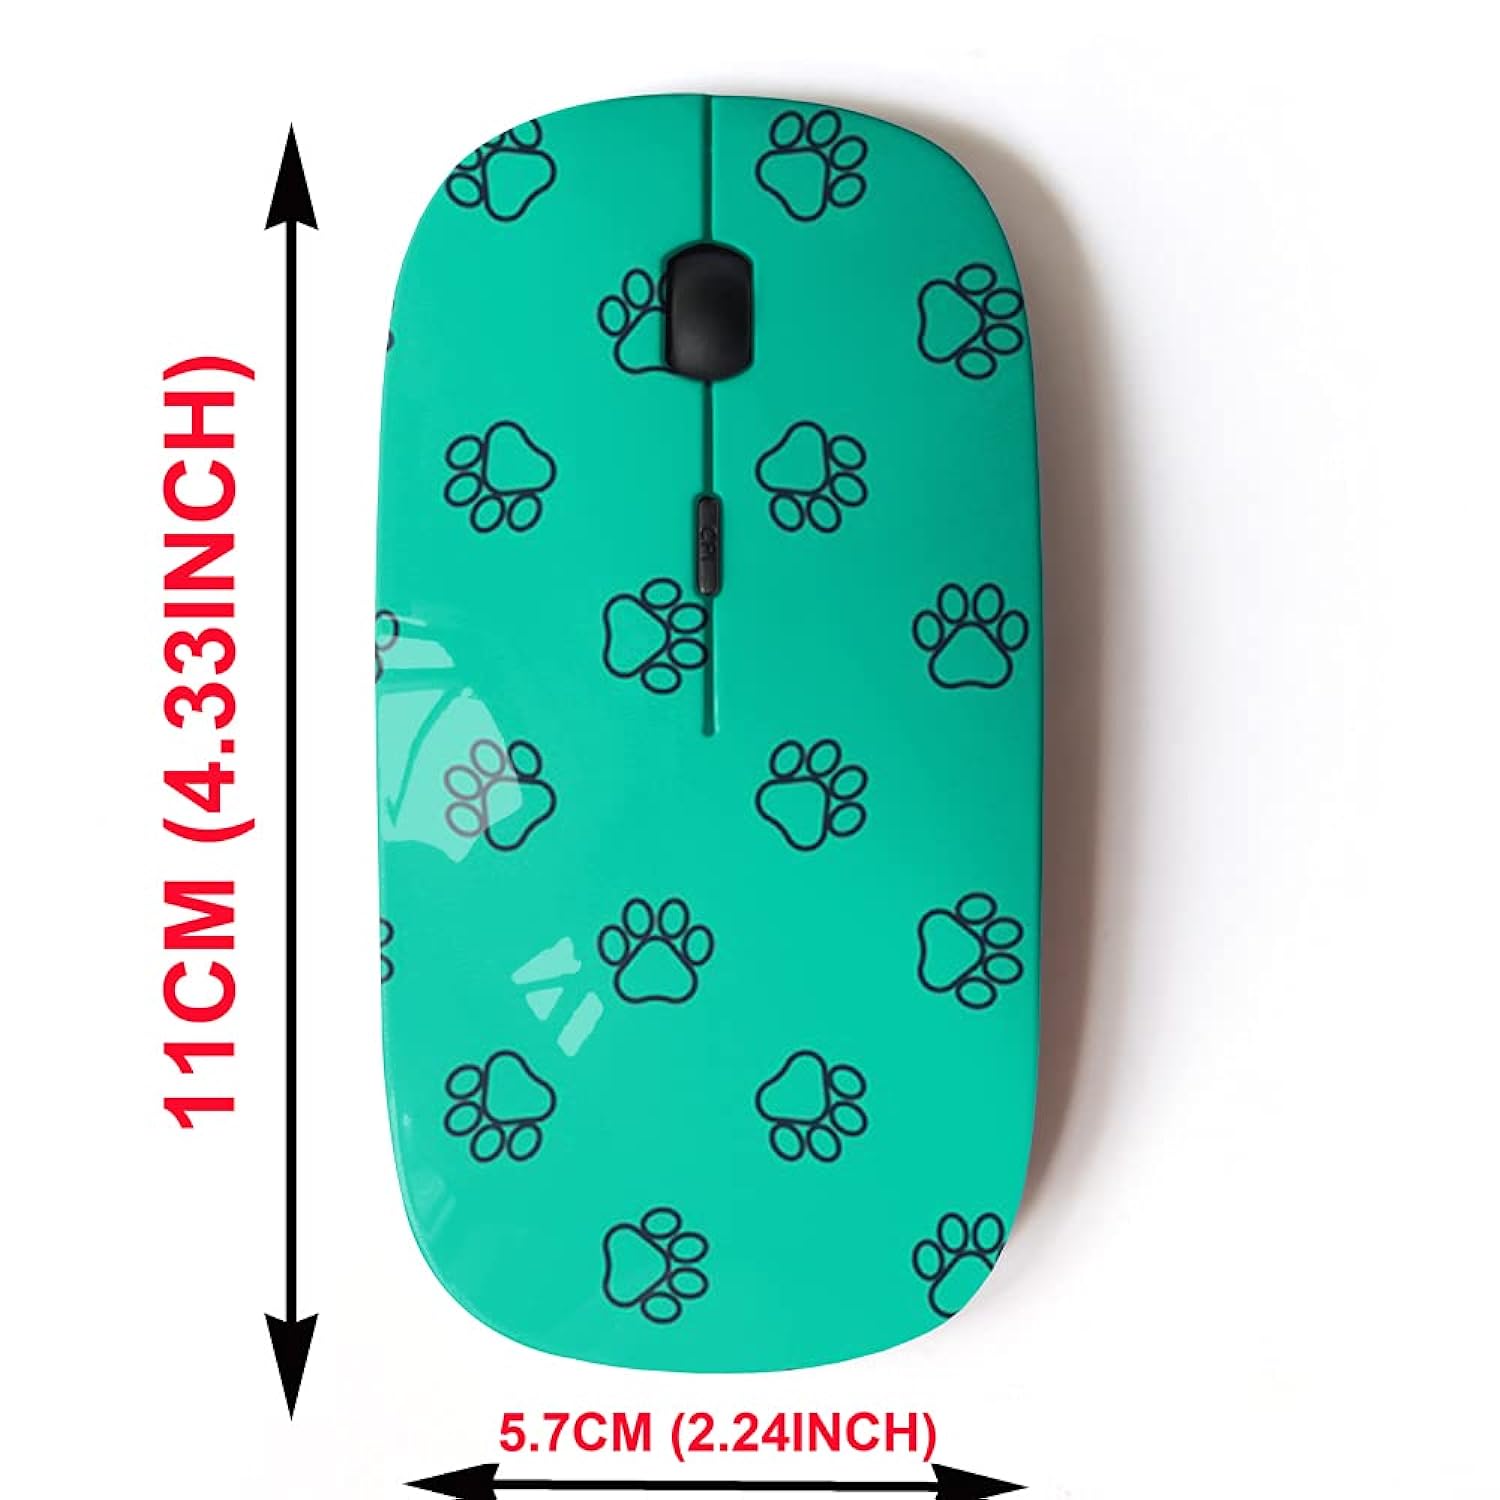 thinkstar 2.4G Wireless Mouse With Cute Pattern Design For All Laptops And Desktops With Nano Receiver - Blue Line Paw Print Icon